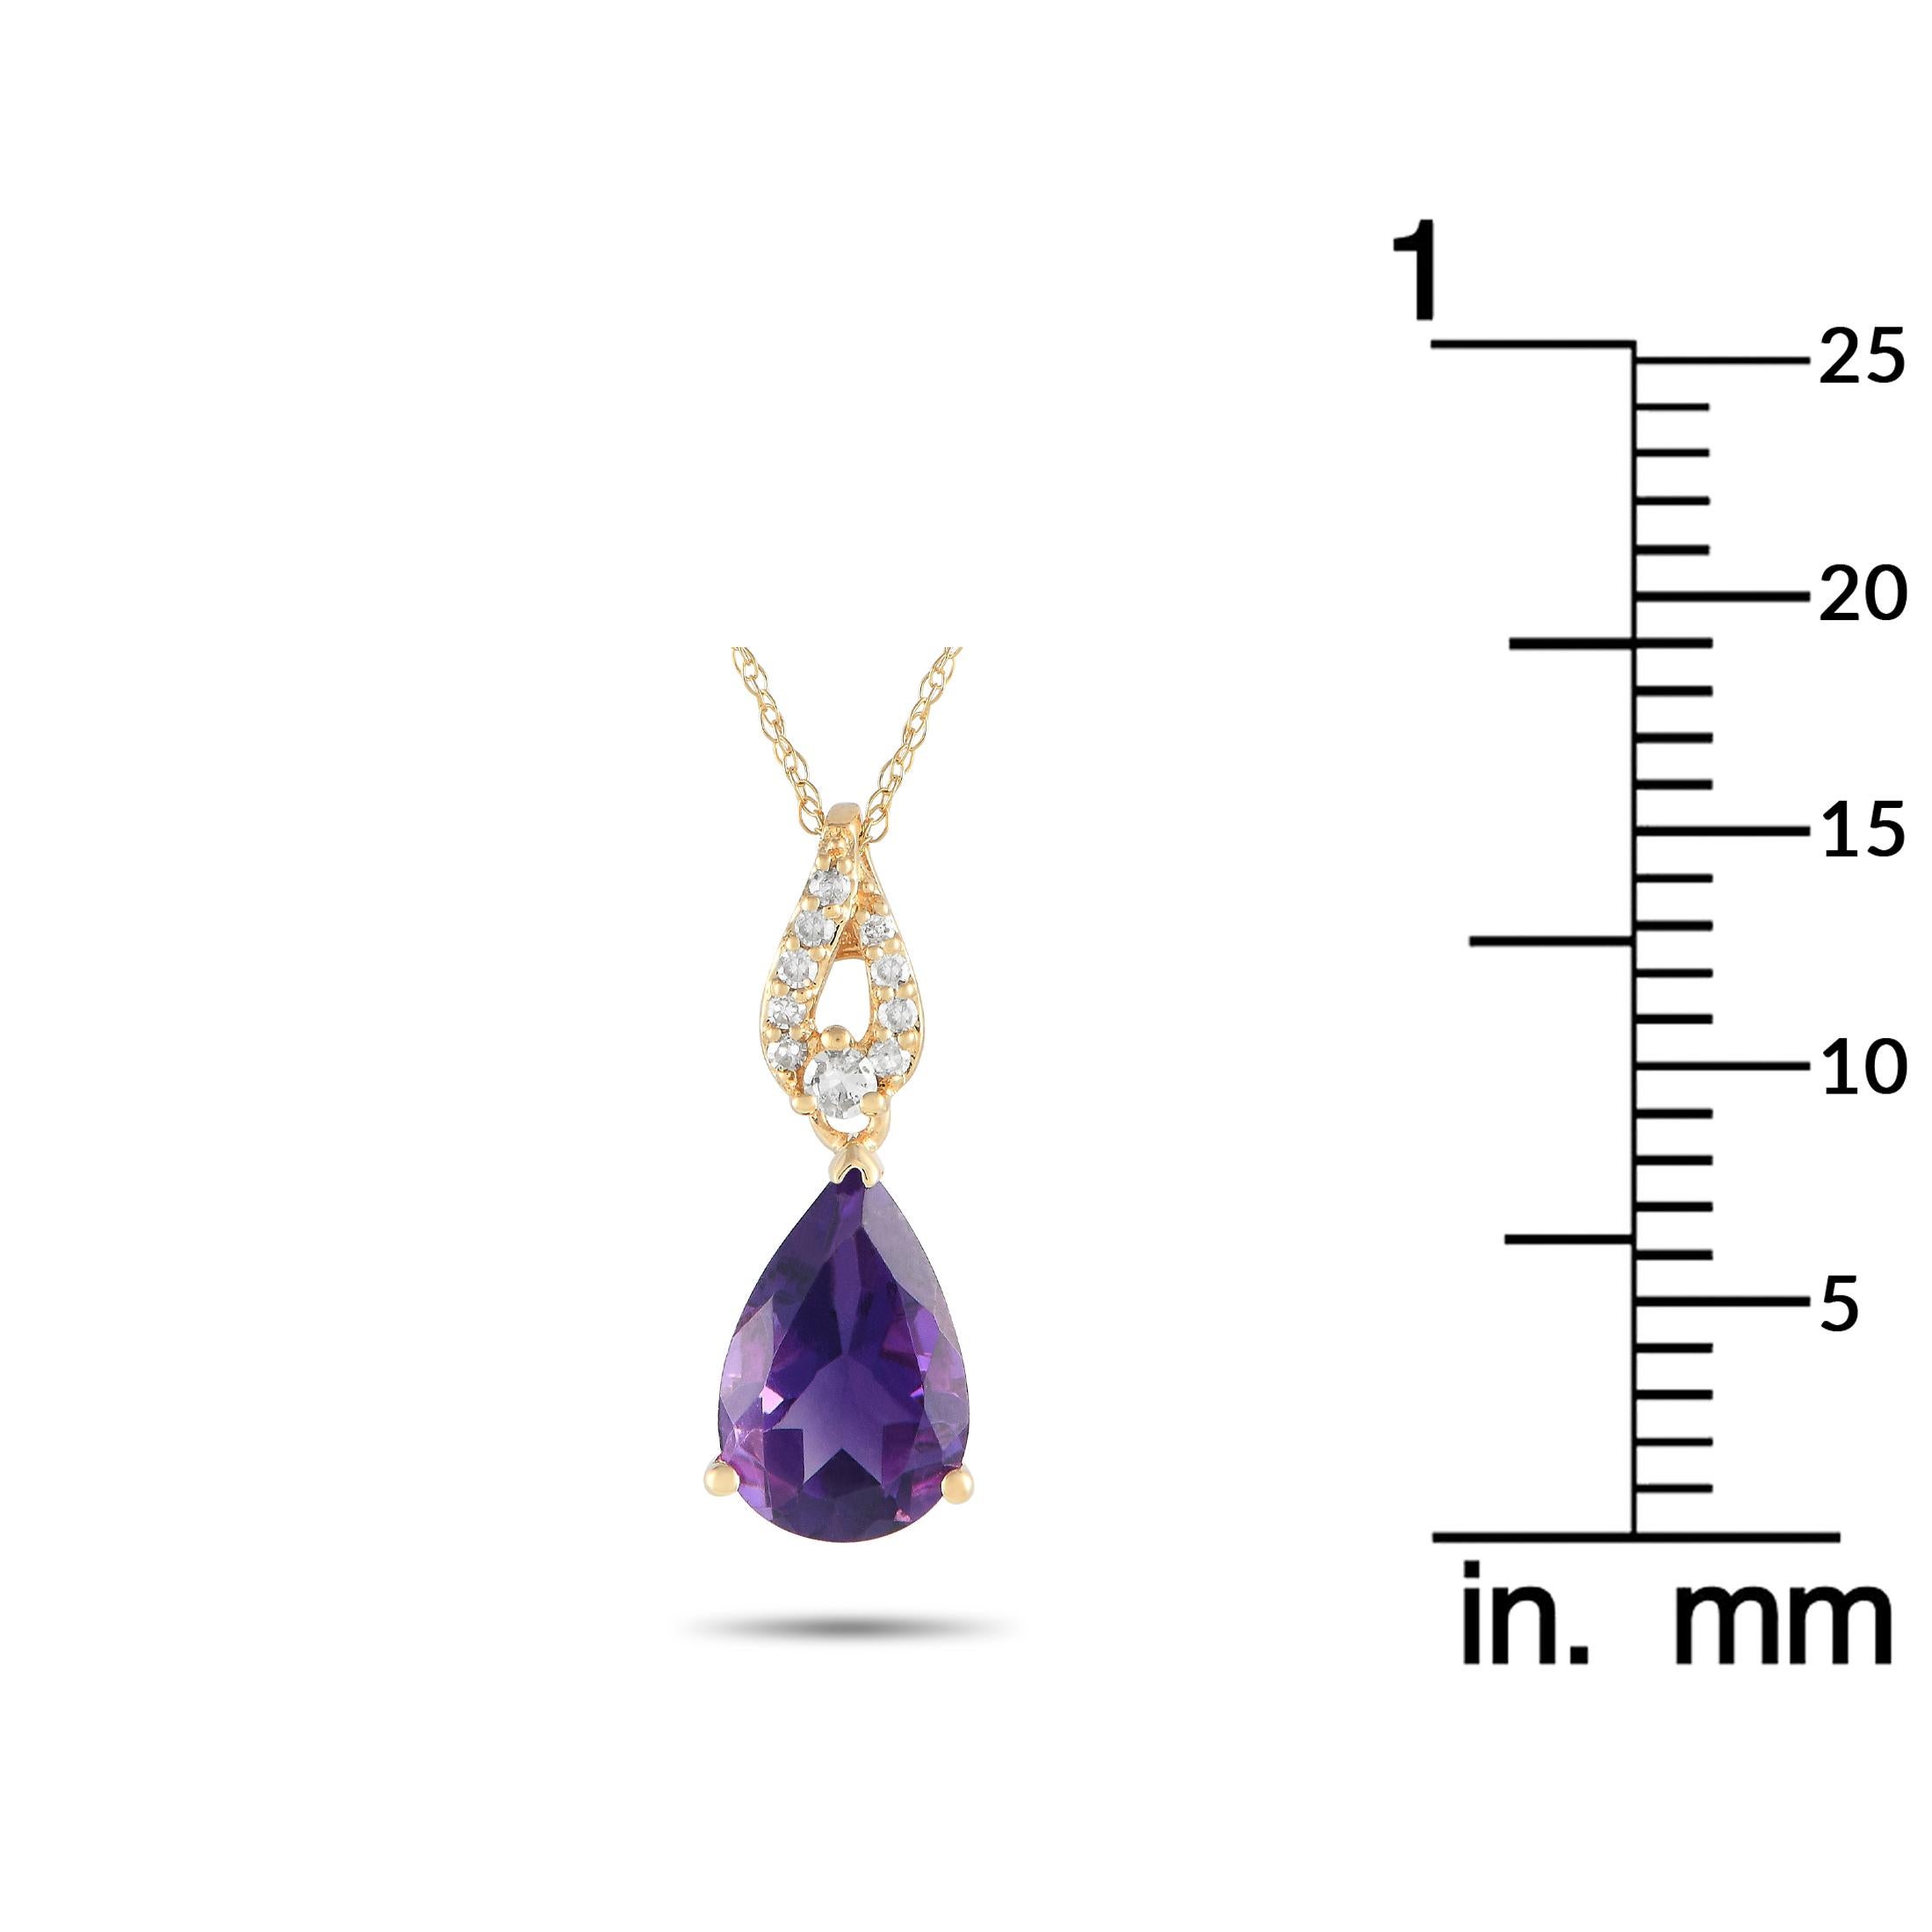 LB Exclusive 14K Yellow Gold 0.06ct Diamond and Amethyst Necklace PD4-16184YAM In New Condition For Sale In Southampton, PA